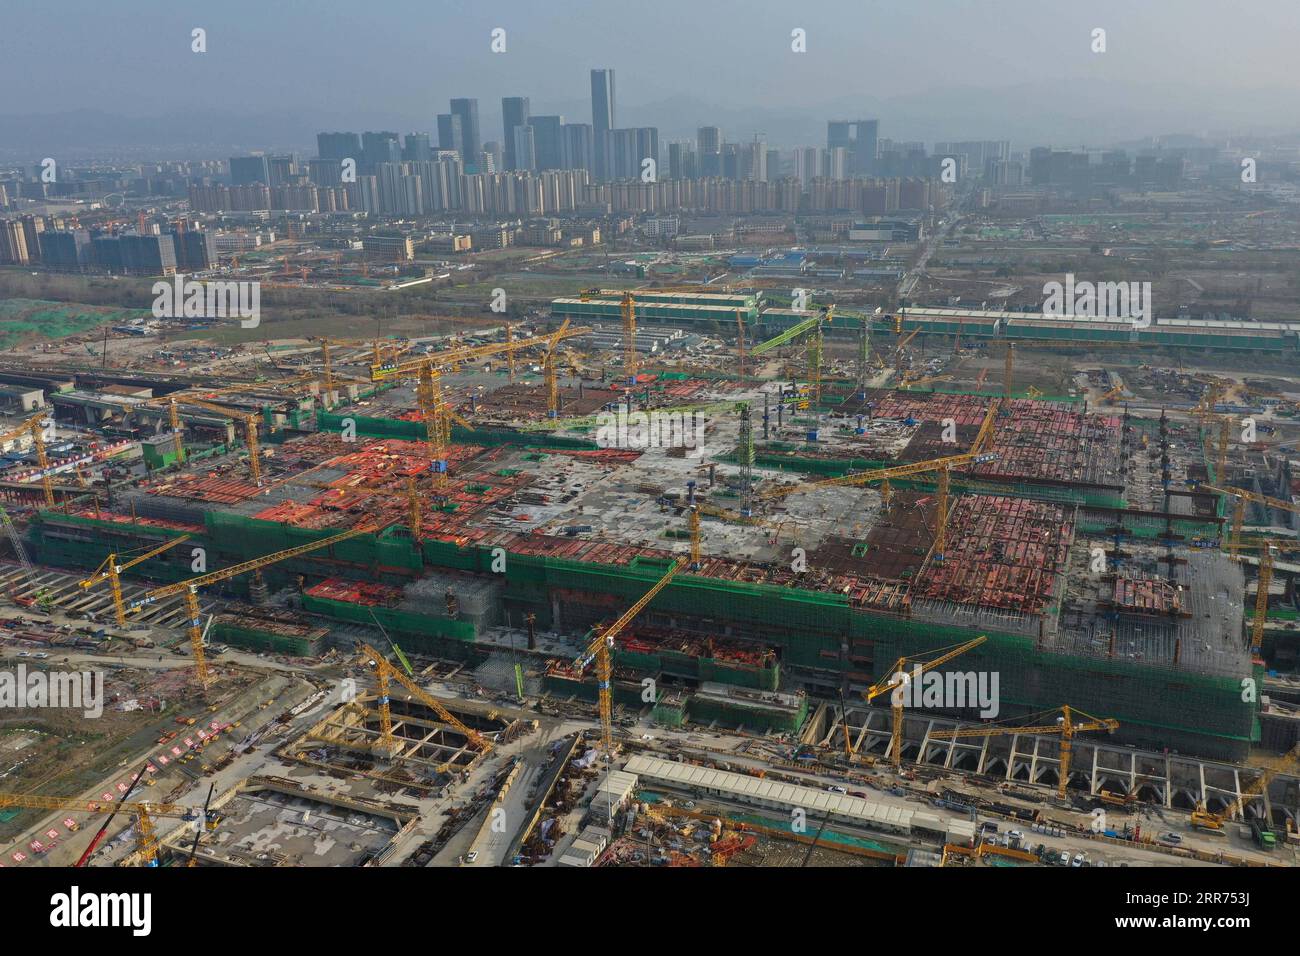 210312 -- HANGZHOU, March 12, 2021 -- Aerial photo taken on March 12, 2021 shows the construction site of Hangzhou West Railway Station in Hangzhou, capital of east China s Zhejiang Province. Hangzhou West Railway Station is a key support project for the 2022 Asian Games, and also a part of Hangzhou s grand plans to step up the infrastructure of the city. The construction of the comprehensive transportation hub that integrates multiple means of transportation is well underway.  CHINA-HANGZHOU-TRANSPORTATION HUB-CONSTRUCTION CN HuangxZongzhi PUBLICATIONxNOTxINxCHN Stock Photo